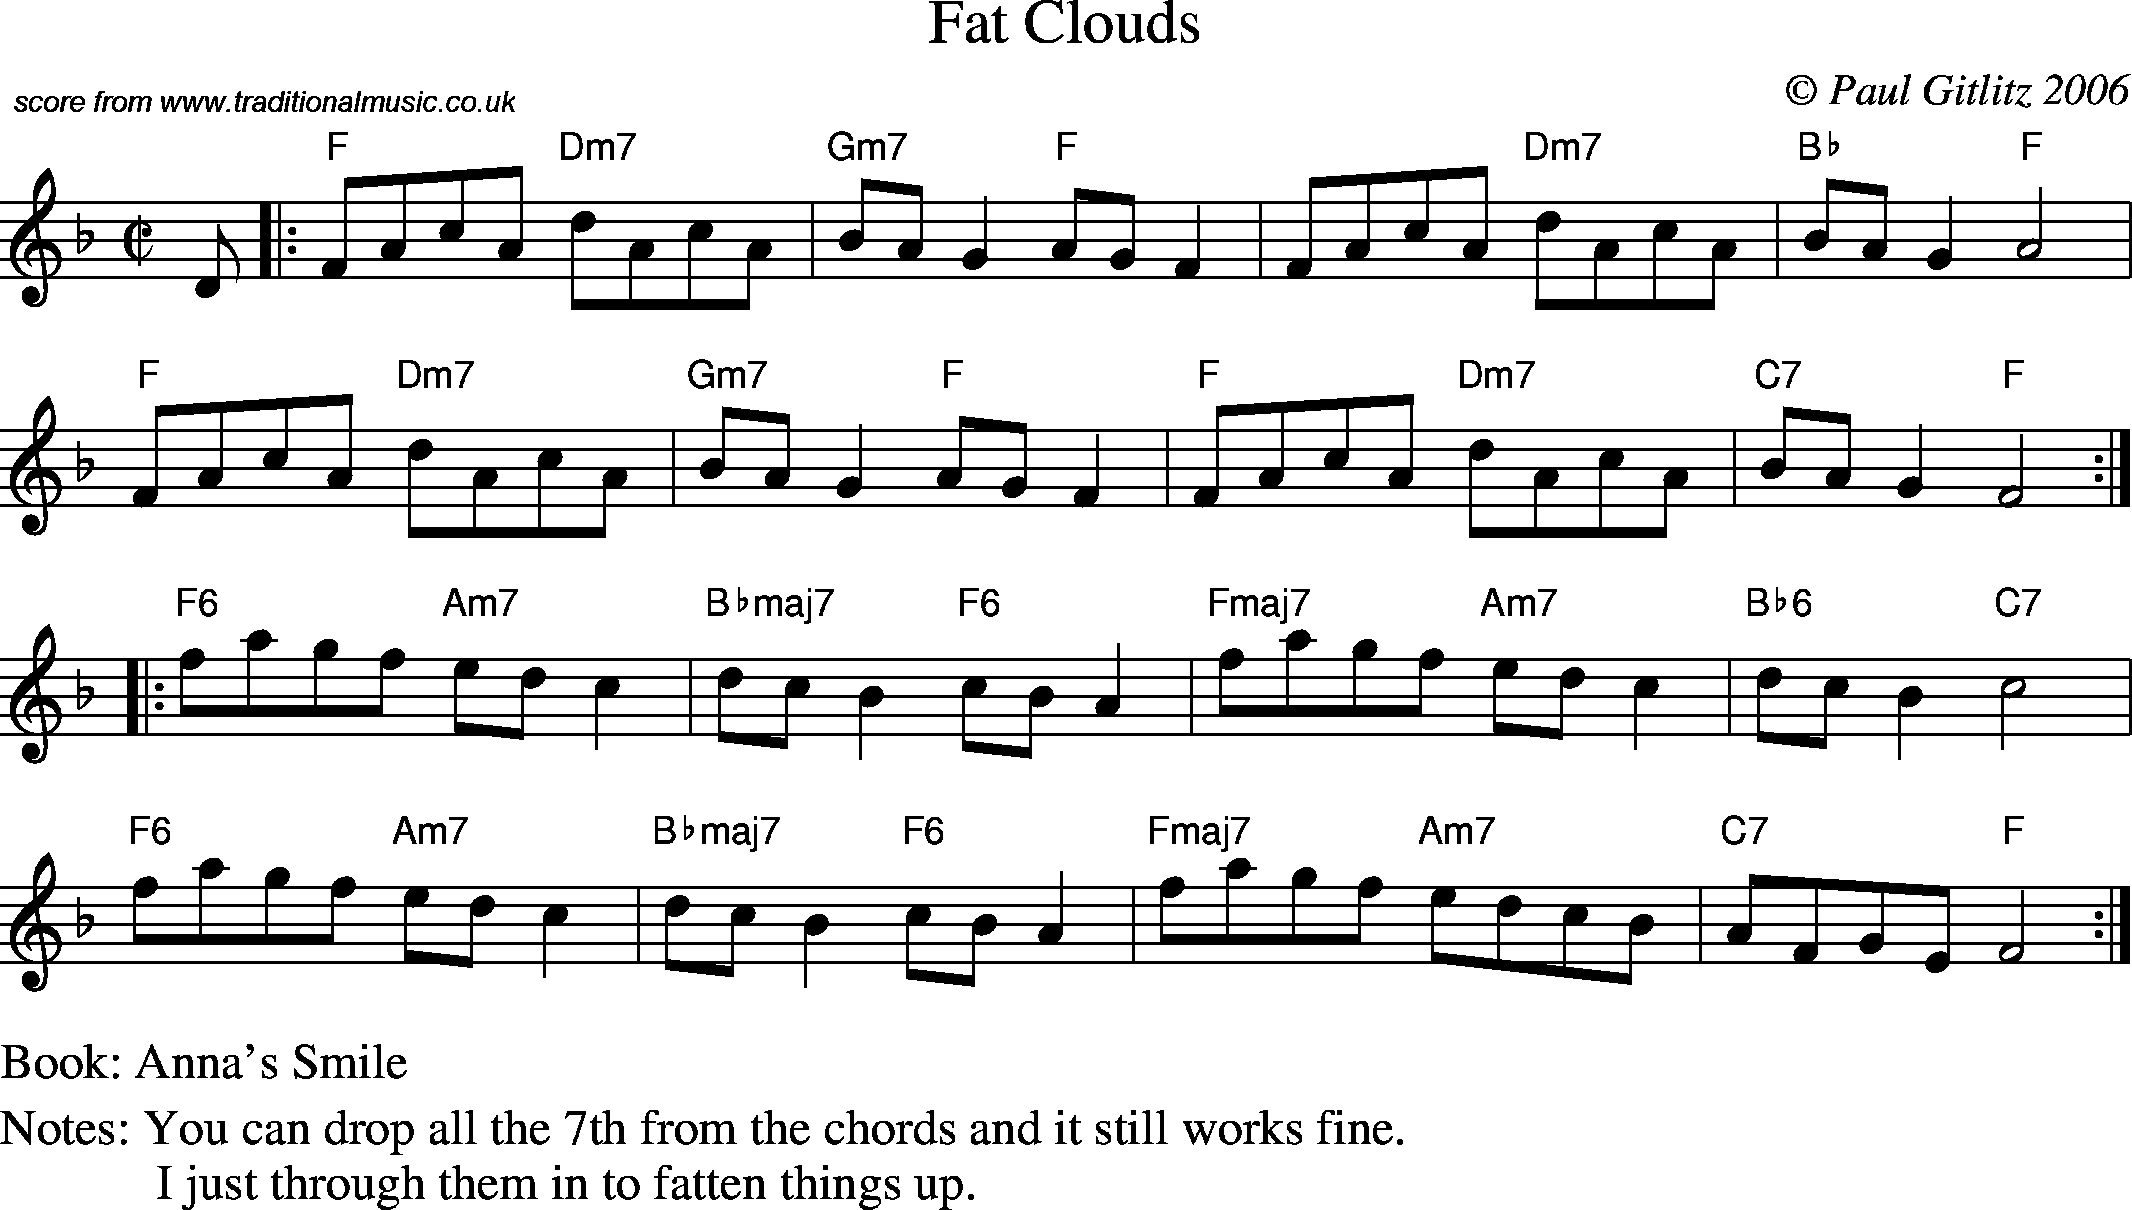 Sheet Music Score for Reel - Fat Clouds